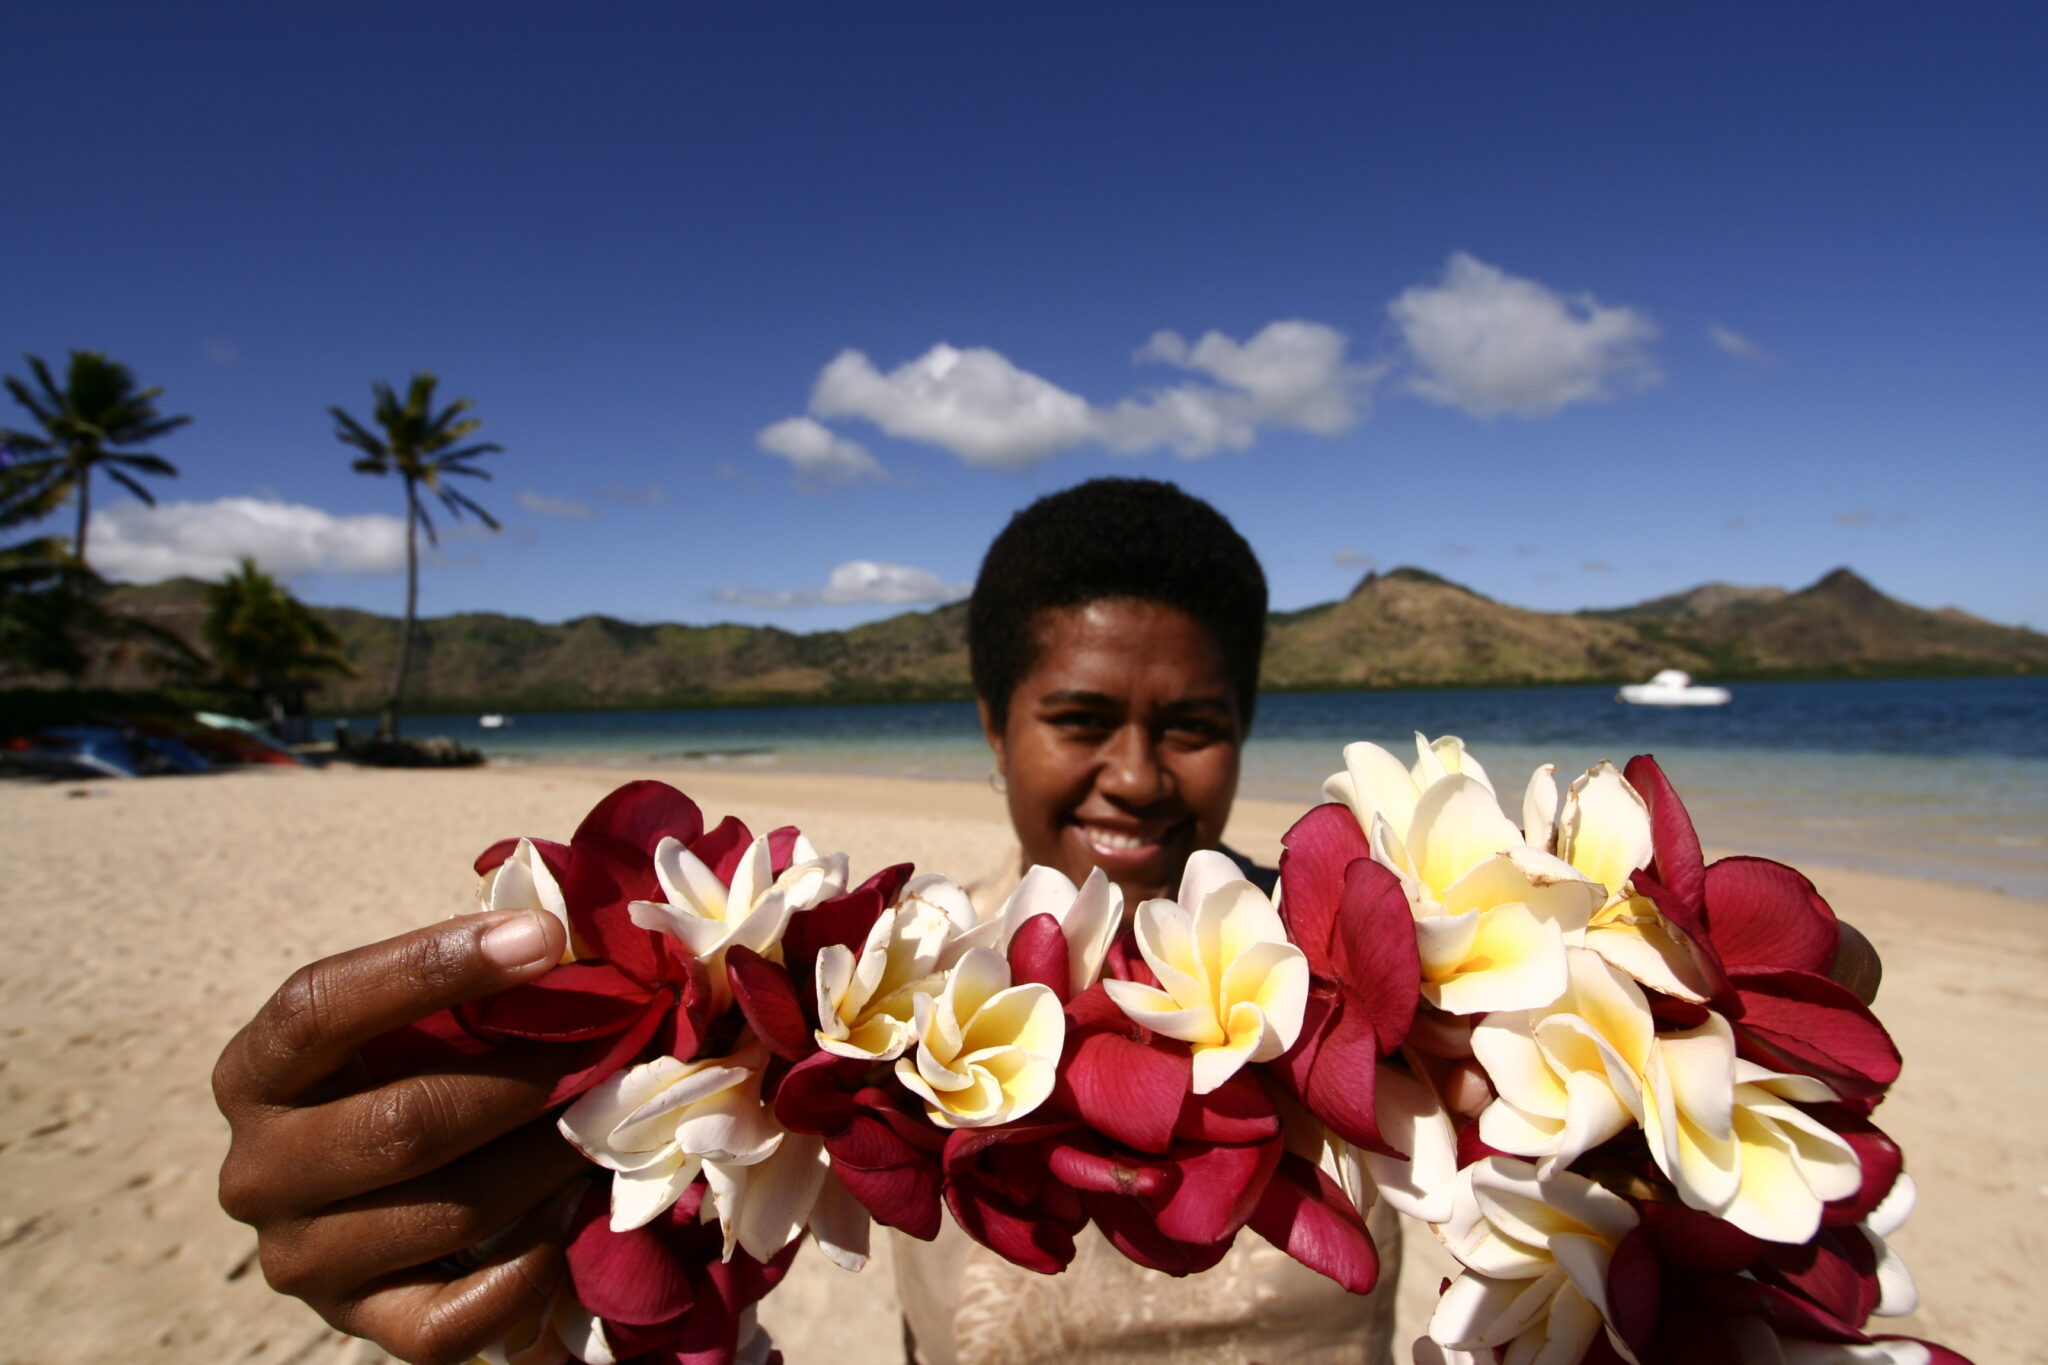 A Fijian holds up a flower necklace as a welcome symbol